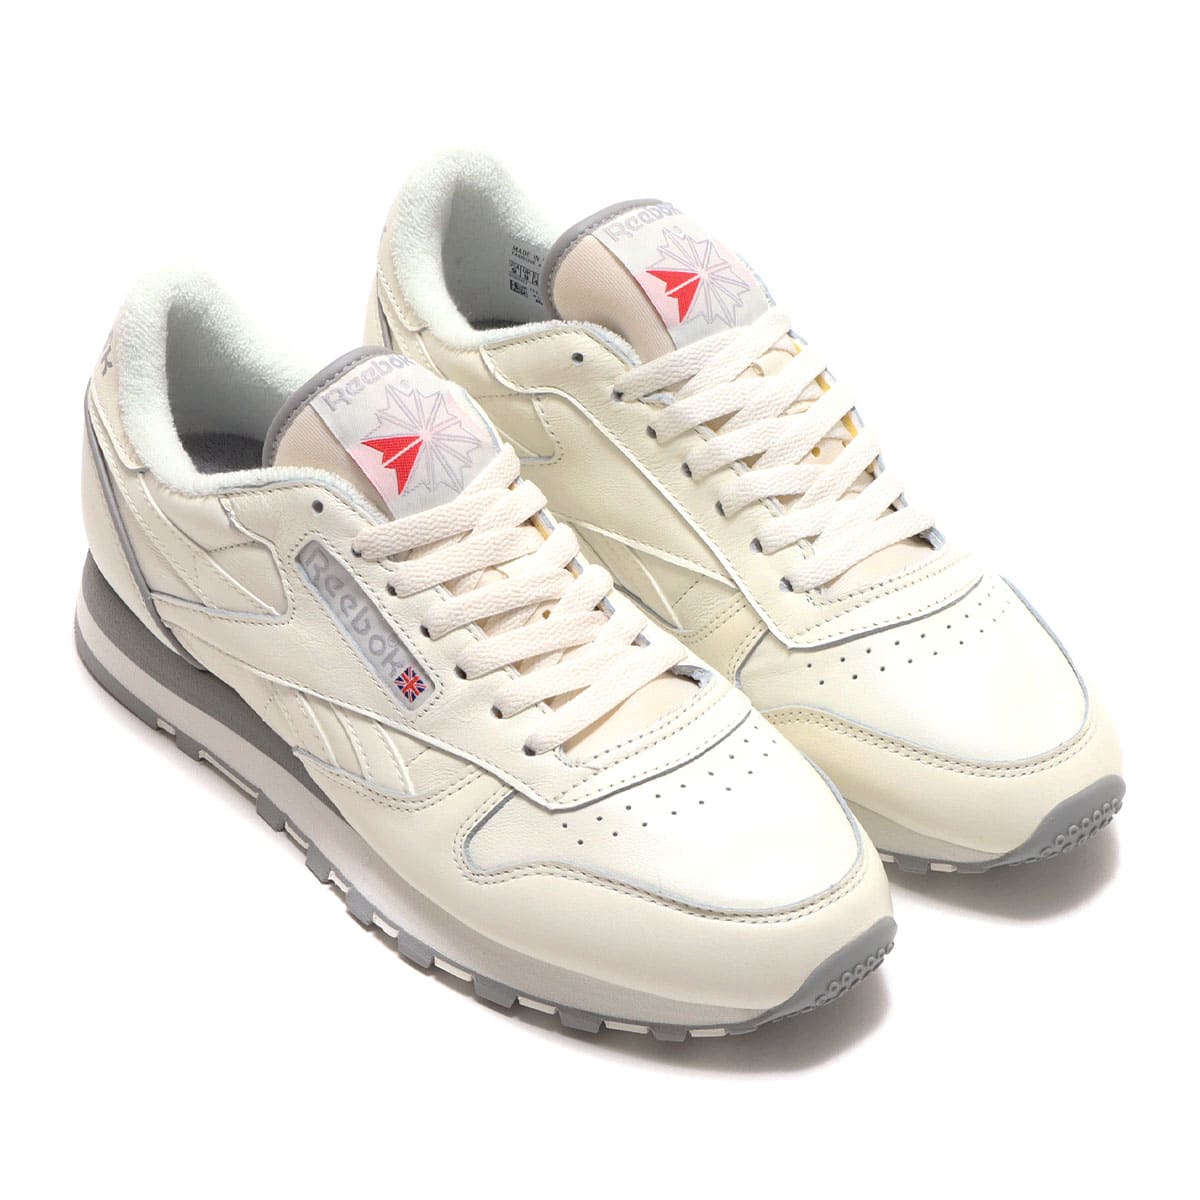 Reebok CLASSIC LEATHER 1983 VINTAGE CHALK/CHALK/VECTOR RED 22FW-I